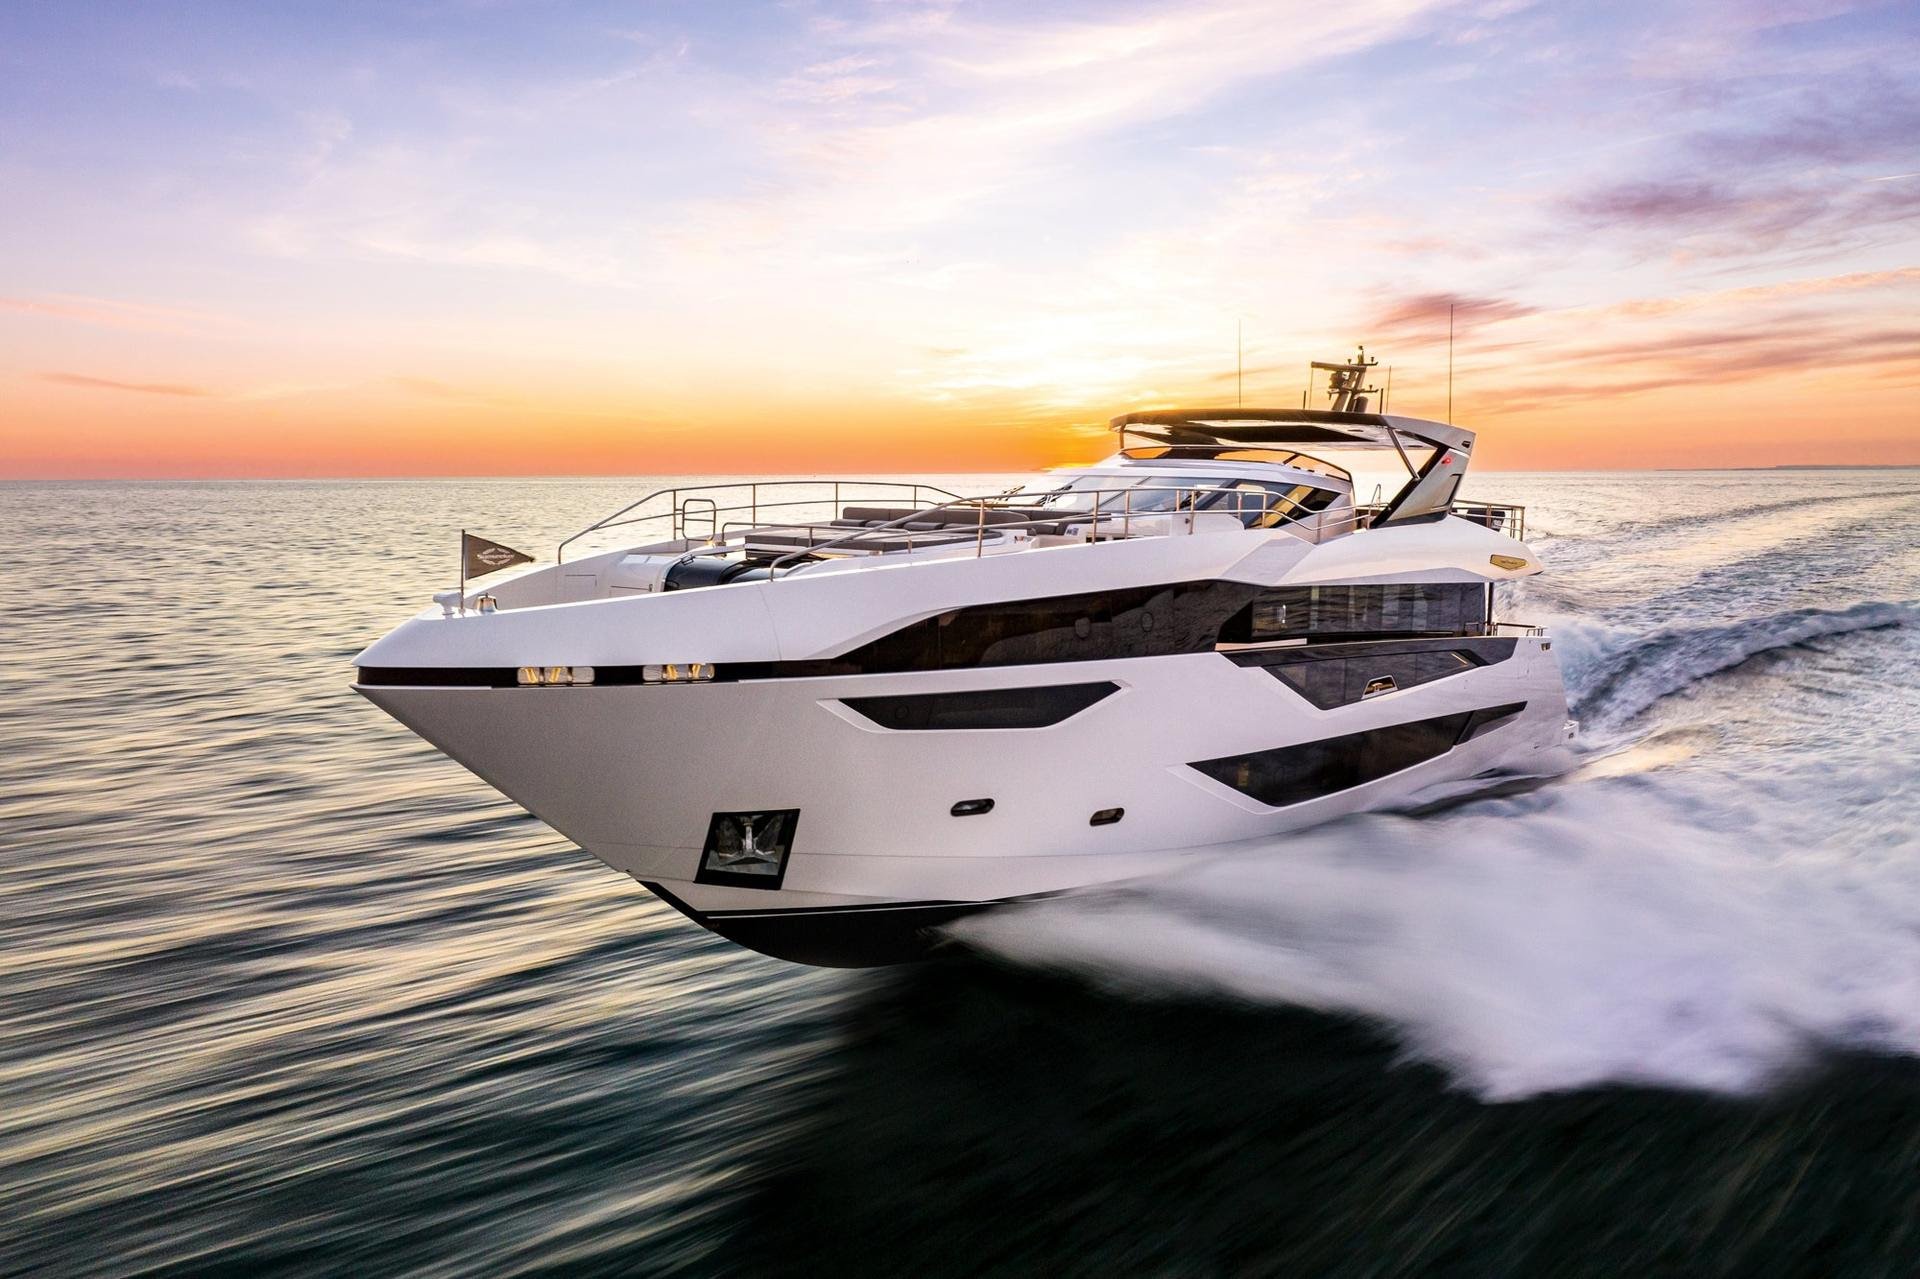 Yachting’s Five-Minute Feature: Onboard the Sunseeker 100 Yacht